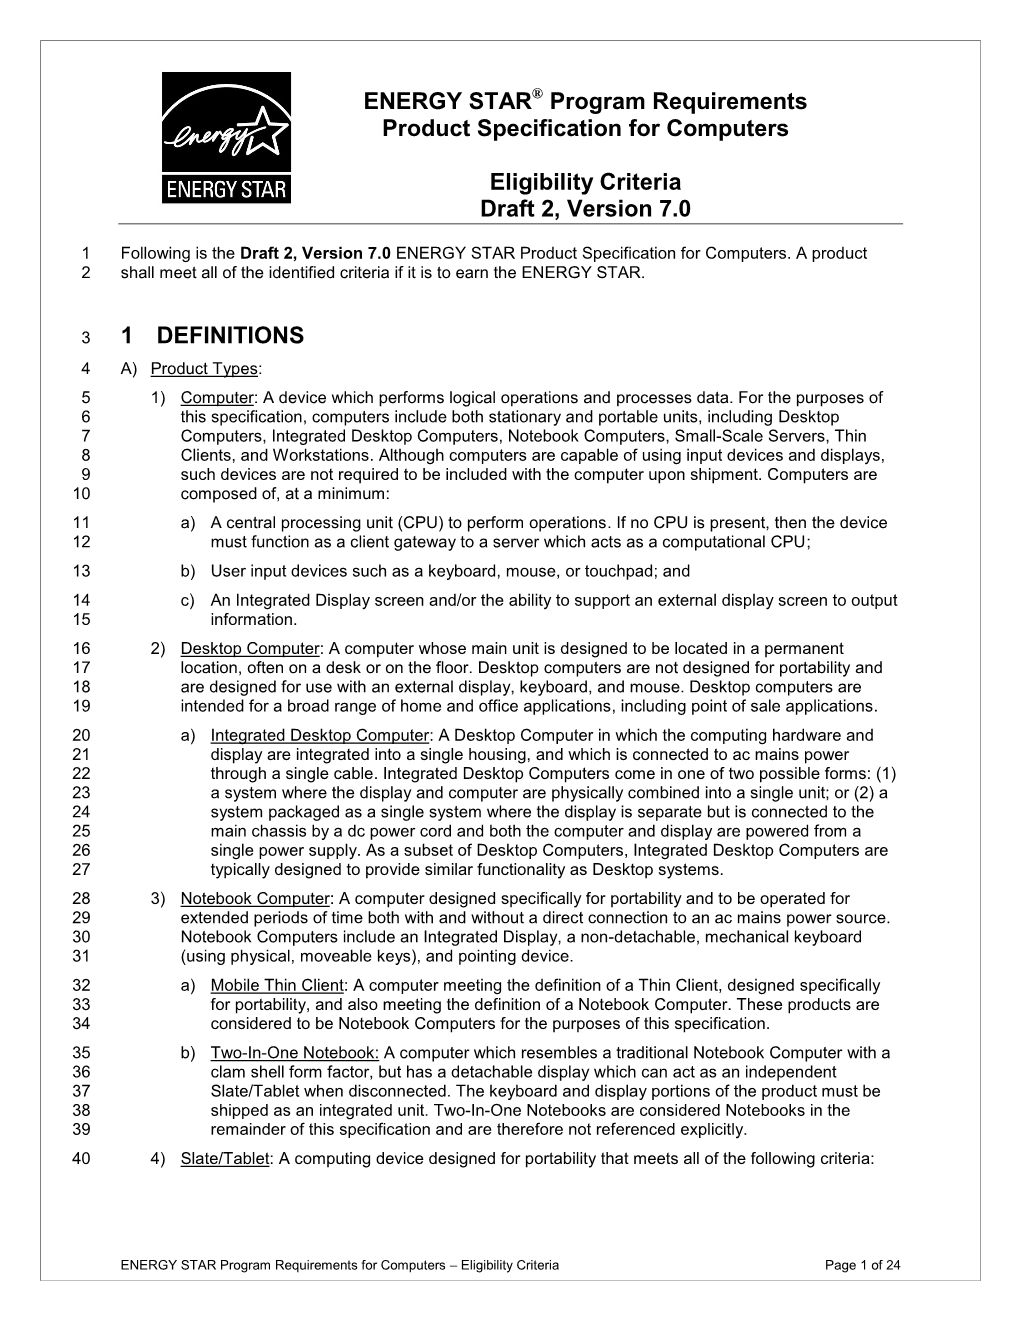 ENERGY STAR Computer Version 7.0 Draft 2 Specification